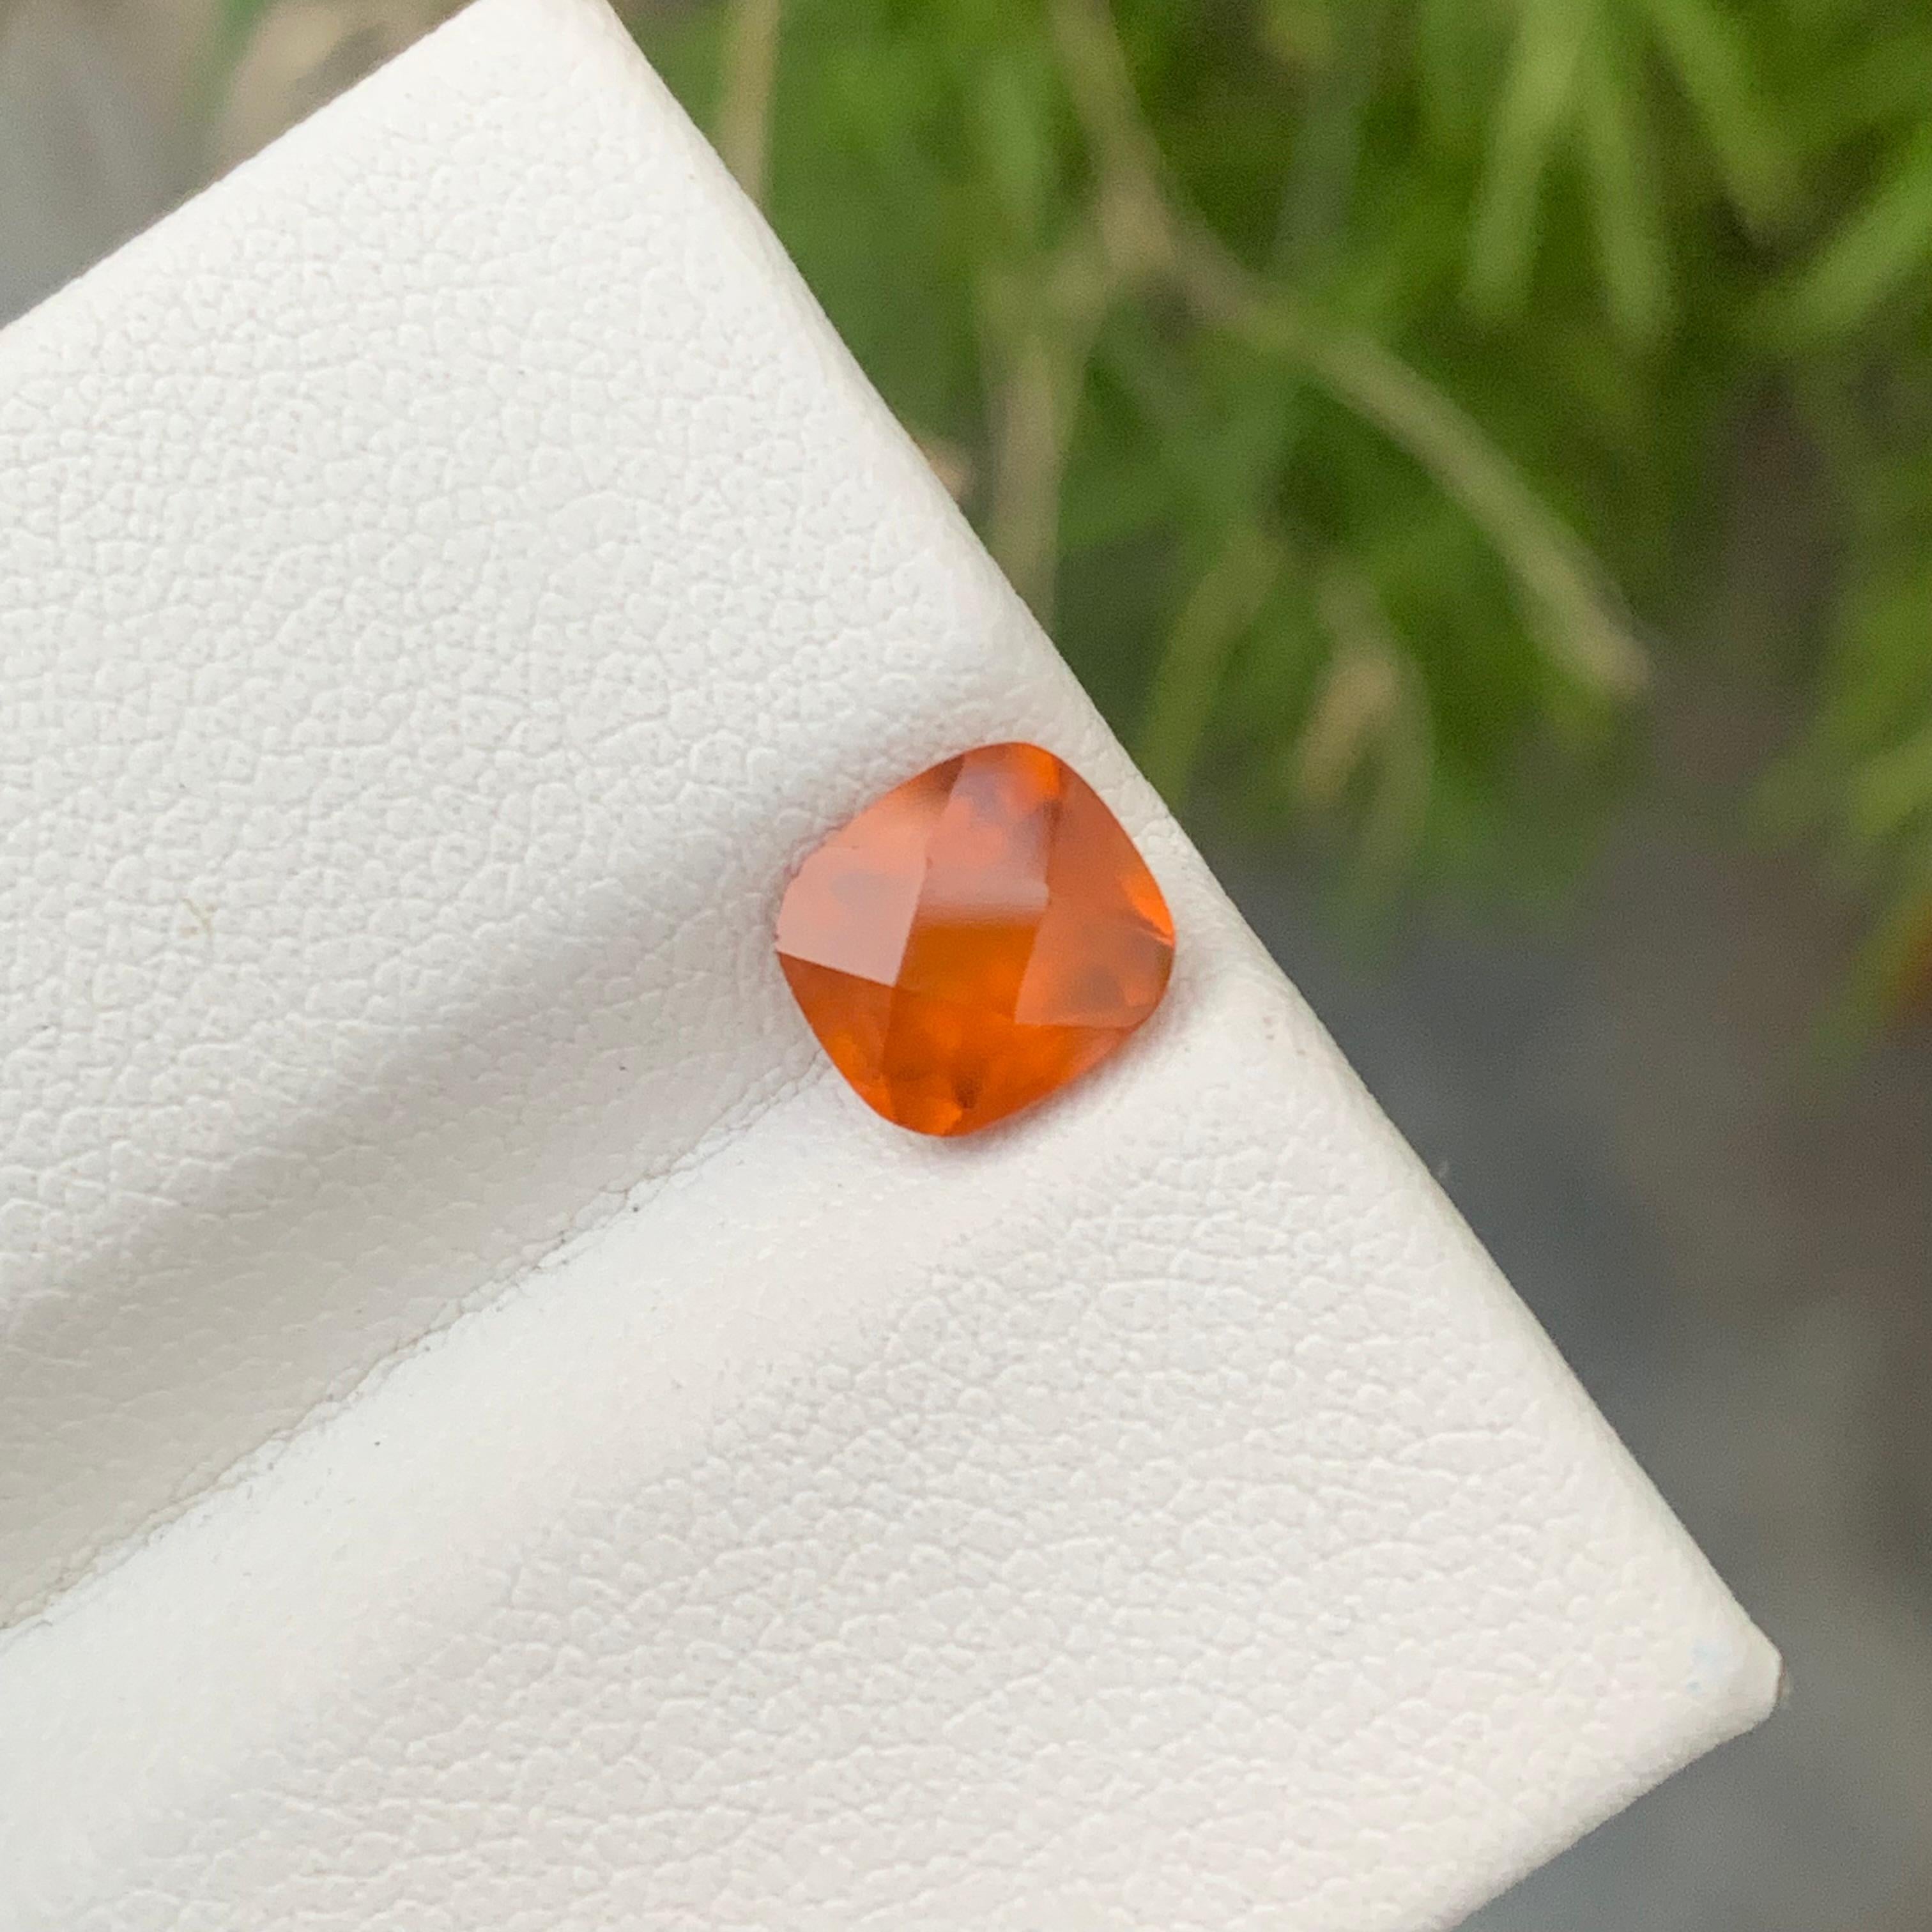 Gemstone Type : Hessonite Garnet
Weight : 1.70 Carats
Dimensions : 7.2x6.6x4.5 Mm
Origin : Africa
Clarity : Smoky 
Shape: Cushion
Color: Fanta Orange
Certificate: On Demand
Birthstone: January Month
According to Vedic astrologists, wearing a